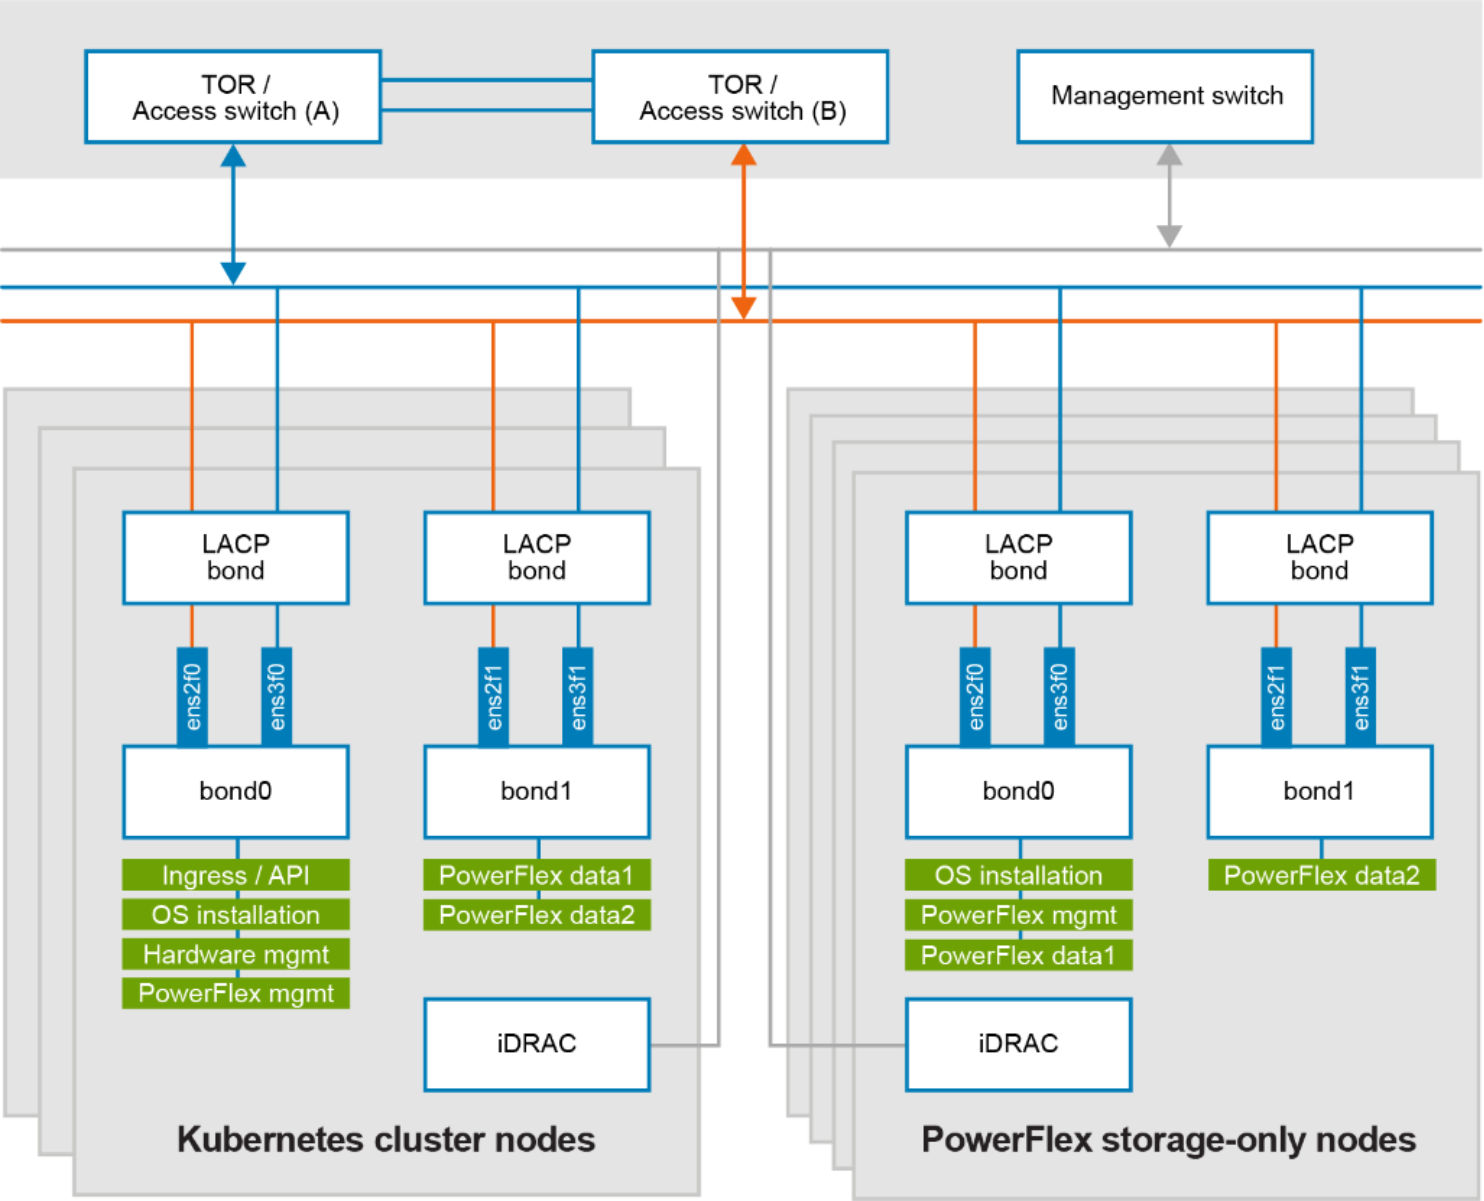 This figure shows the network design of powerflex nodes and clusters.